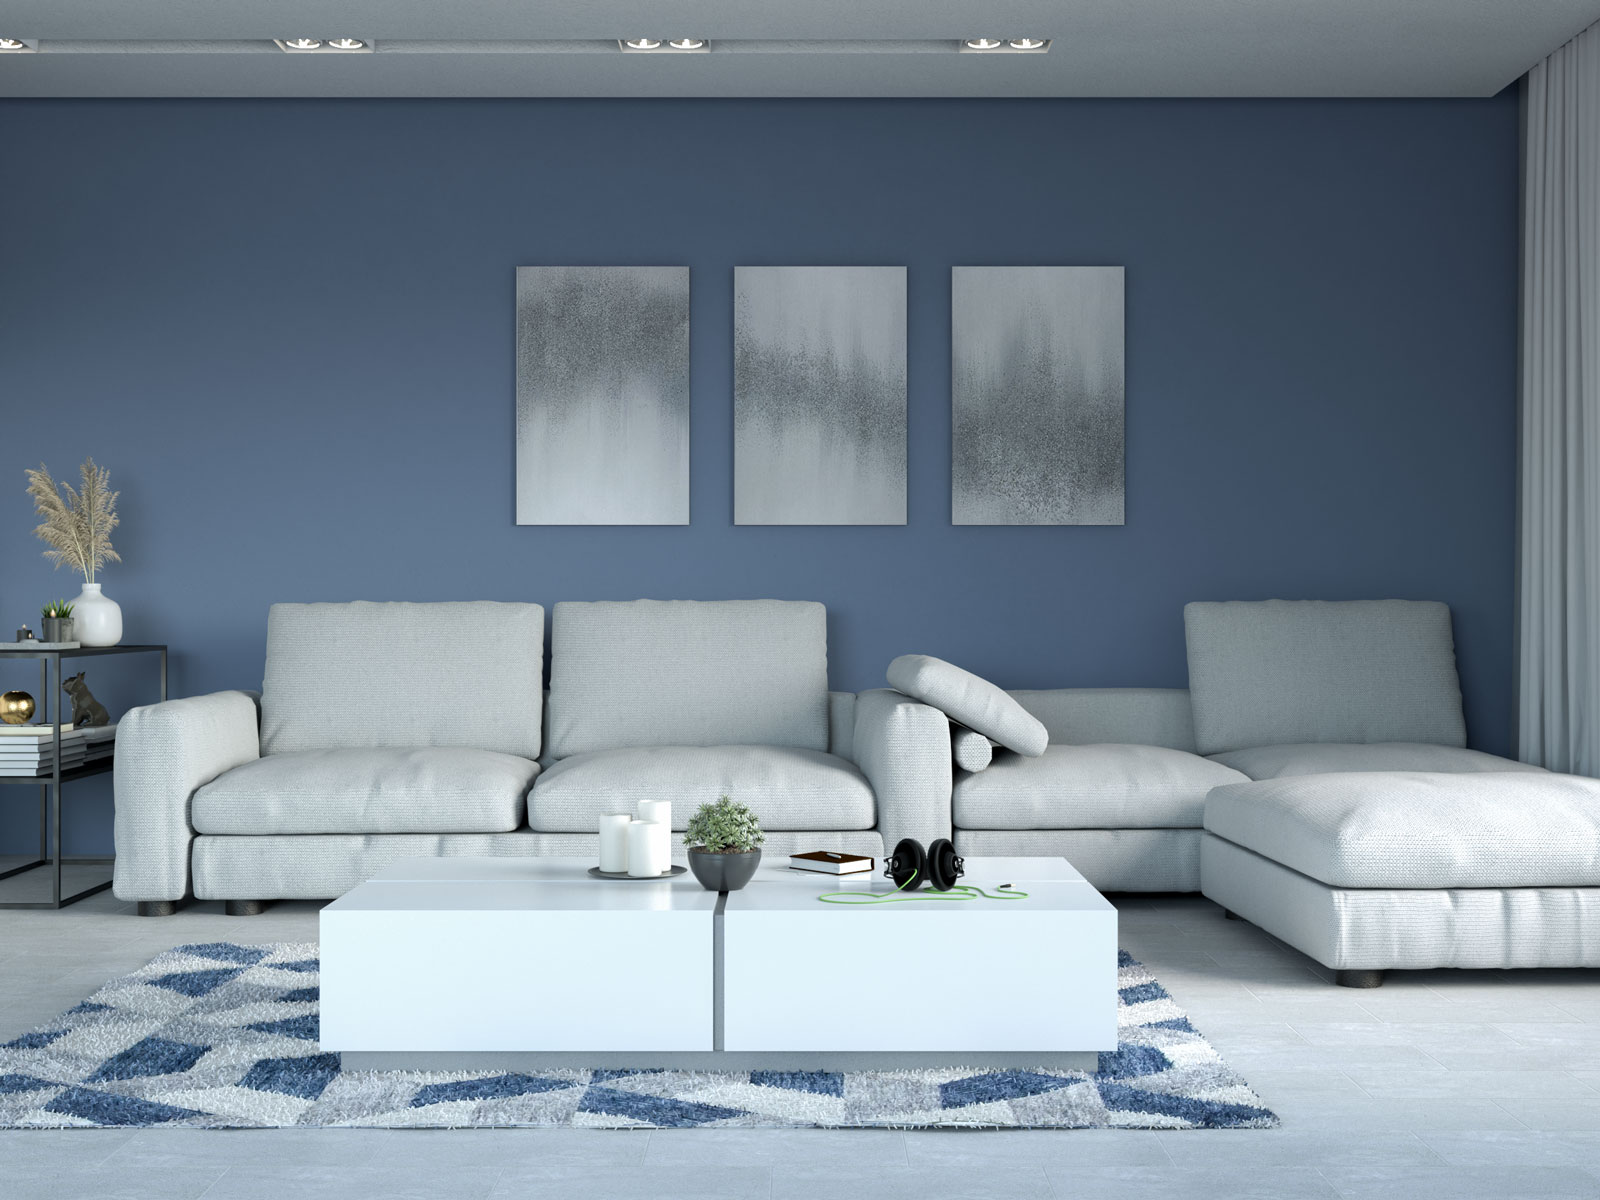 Living room ideas with light gray furniture and blue walls